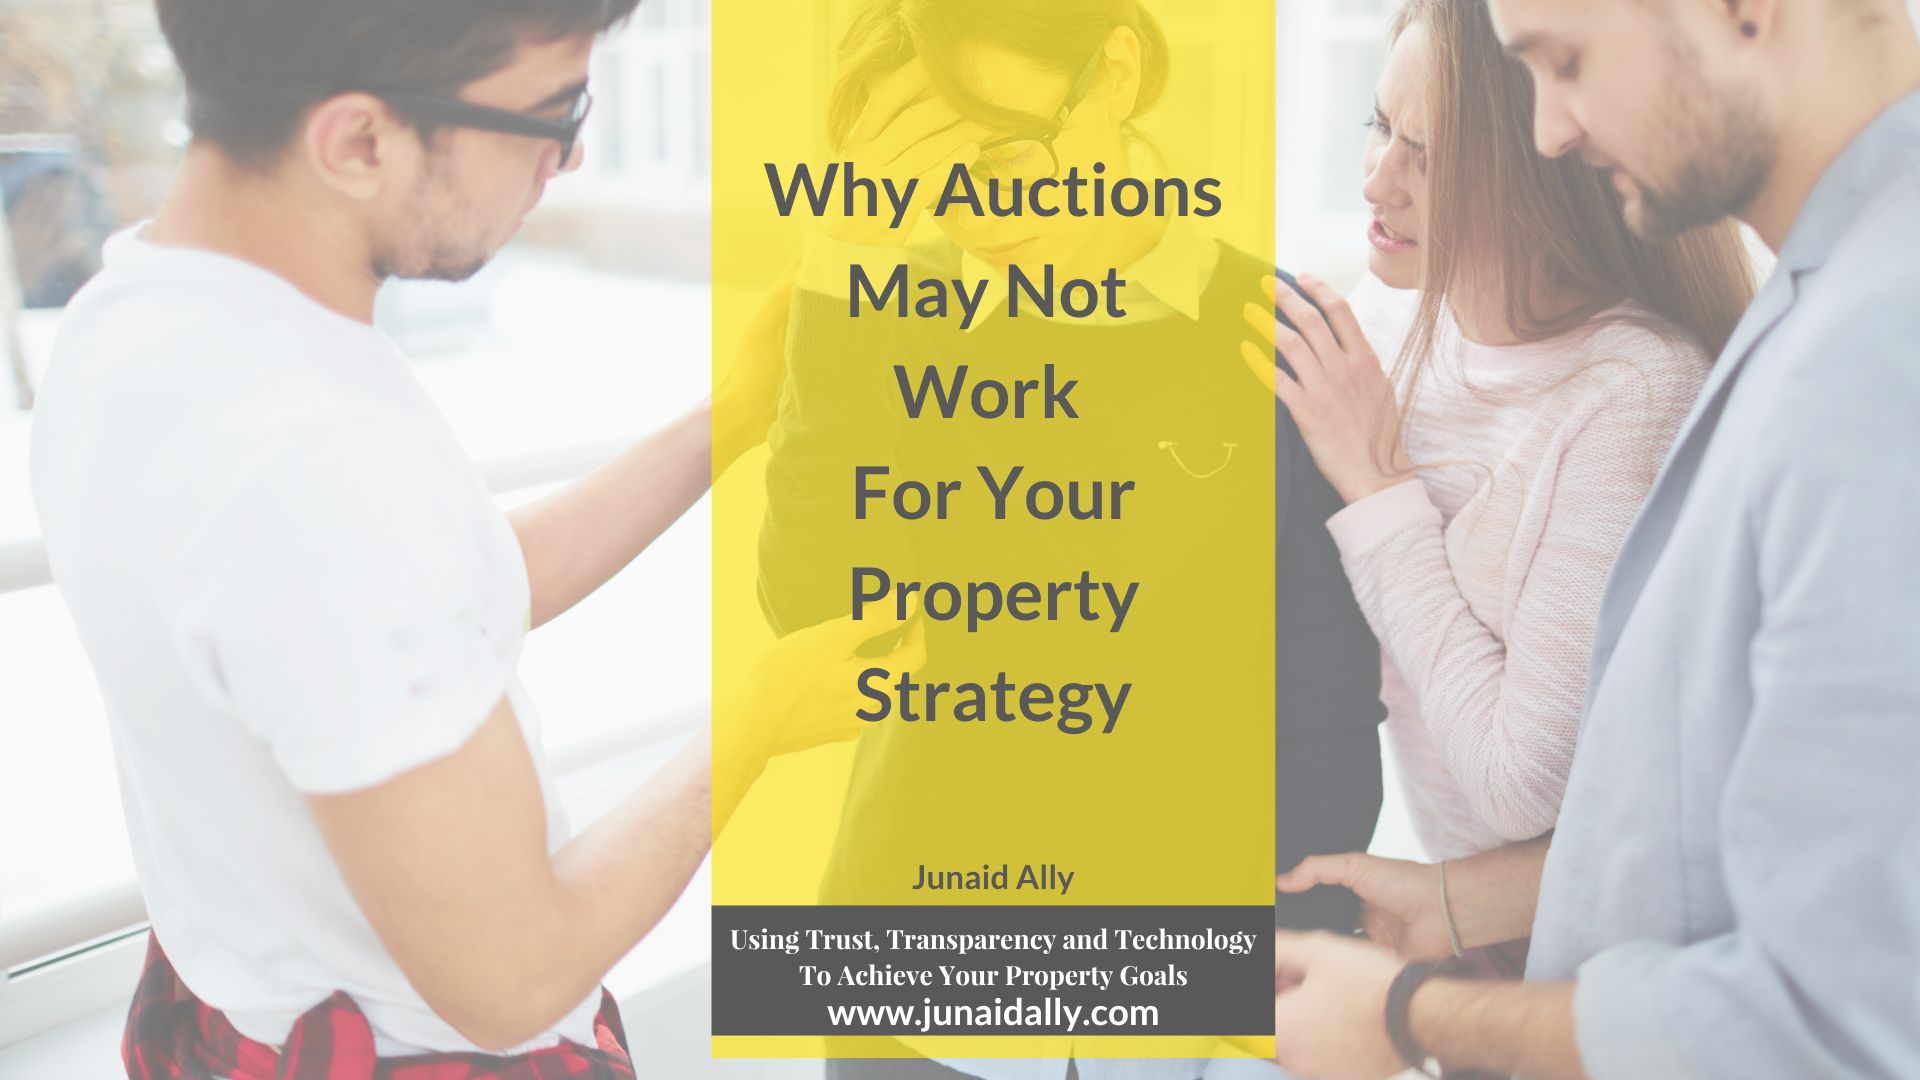 Why Auctions May Not Work For Your Property